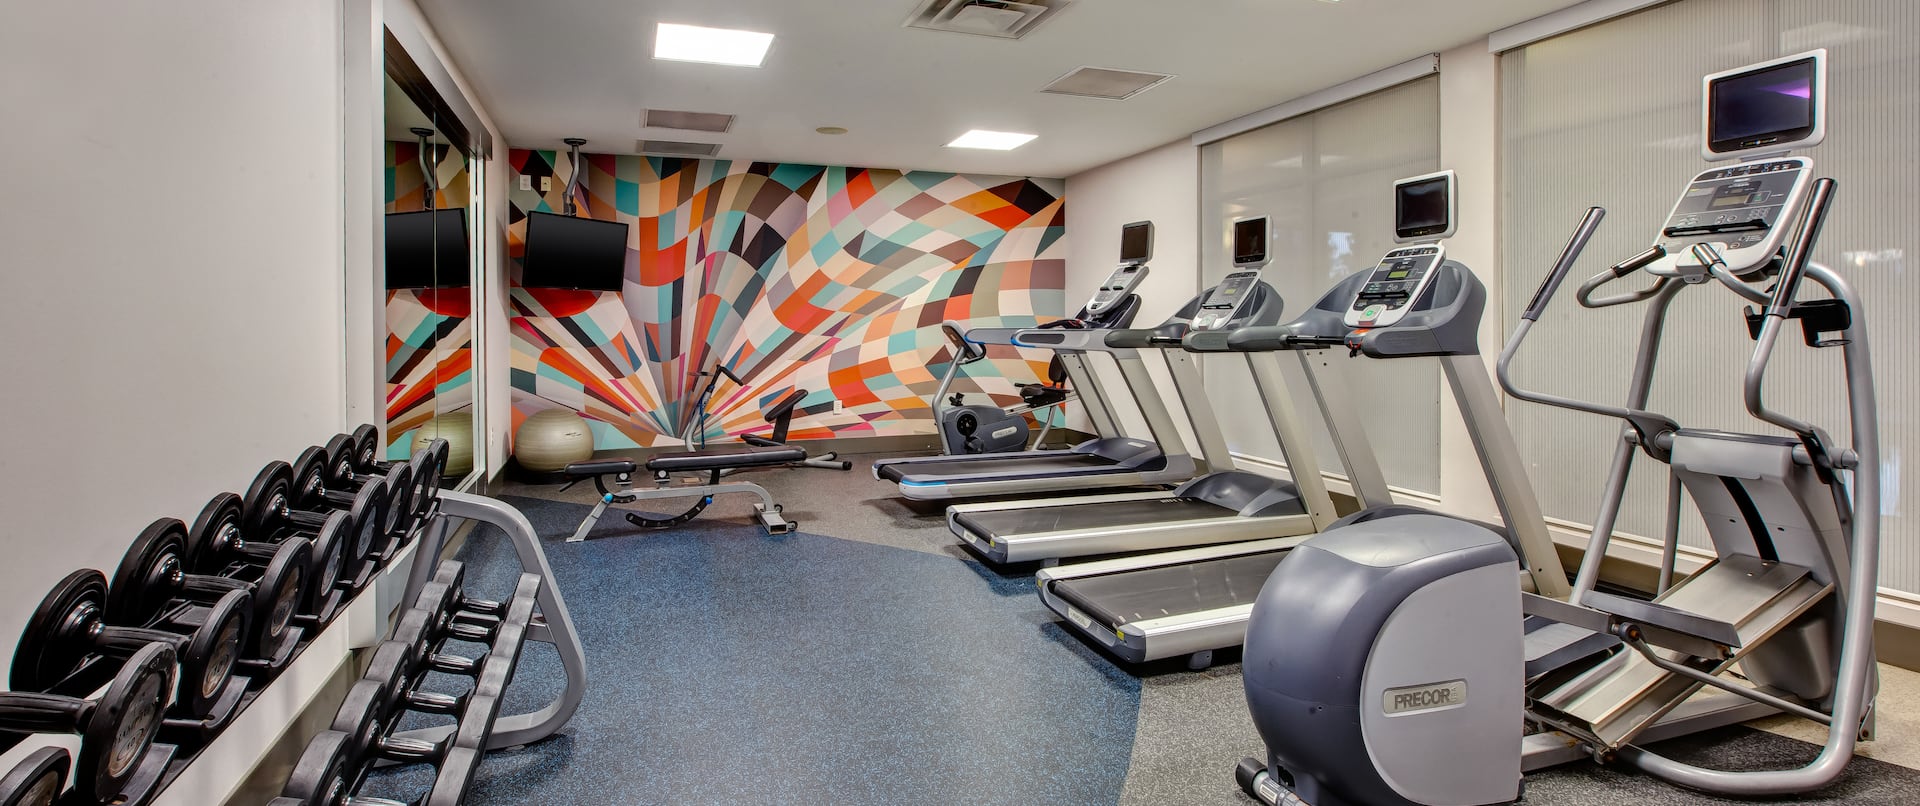 on site fitness center, treadmills, elliptical, free weights